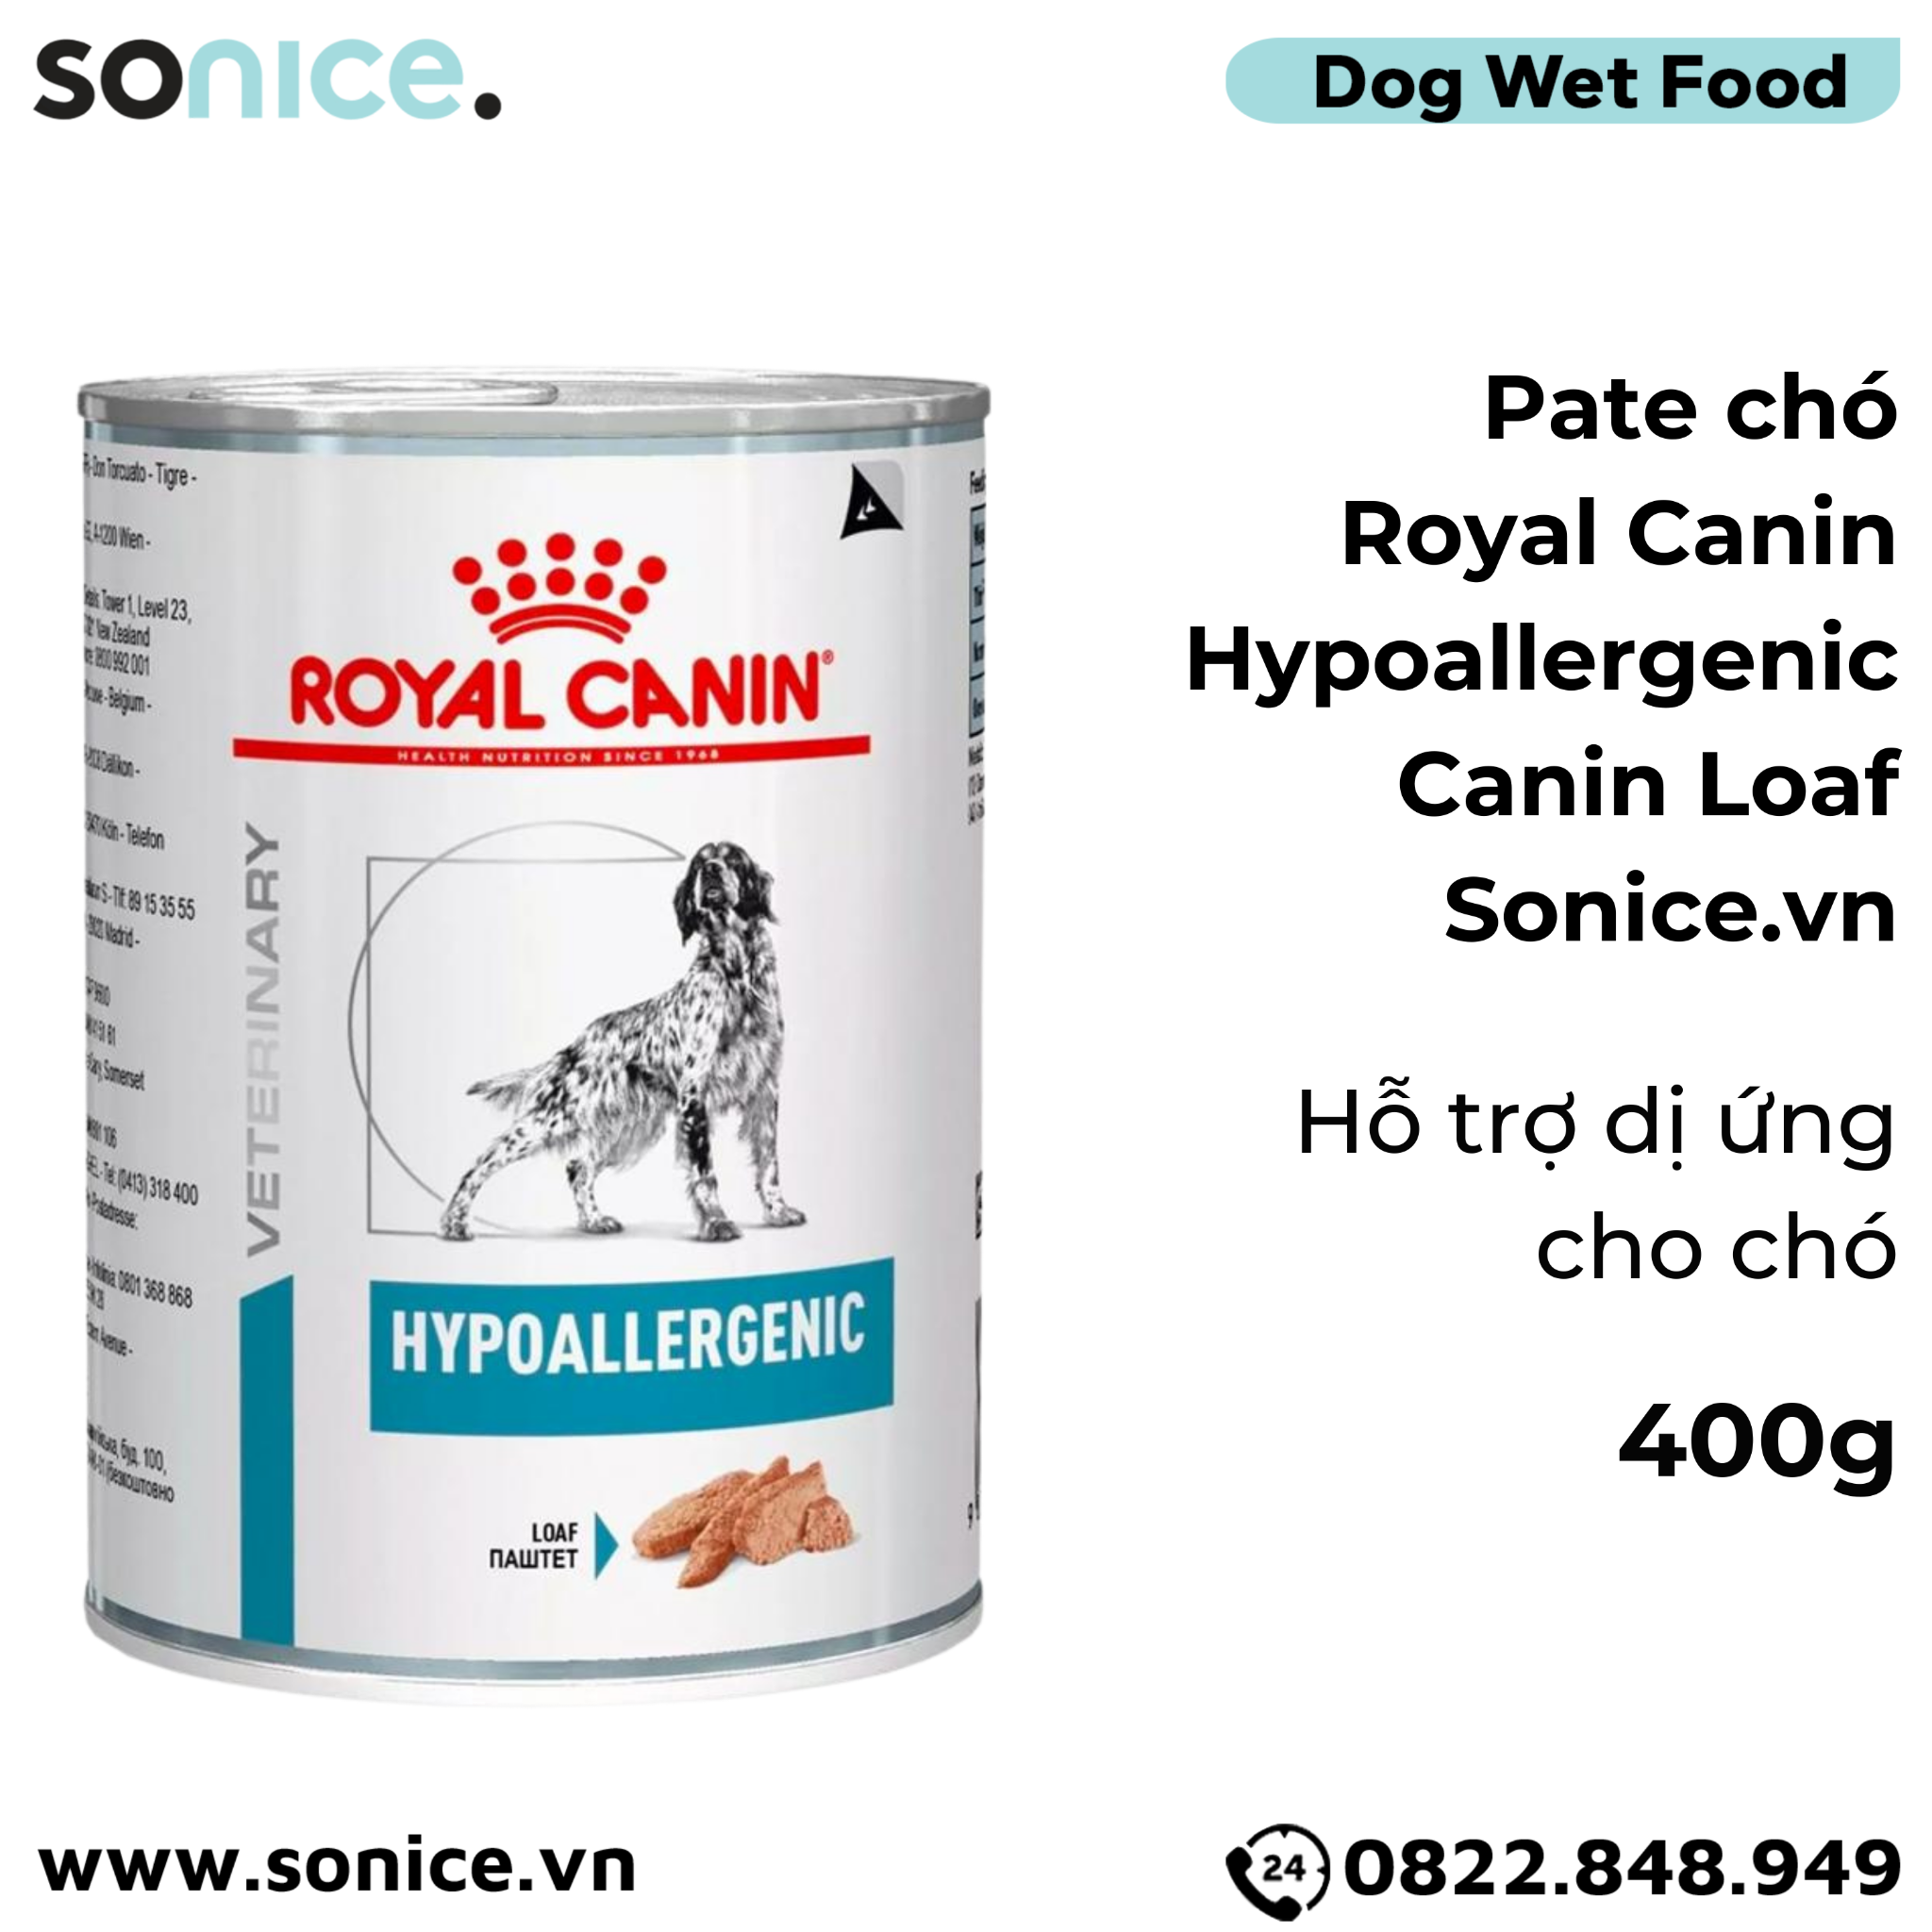  Pate chó Royal Canin Hypoallergenic Canin Loaf 400g - Hỗ trợ dị ứng SONICE. 